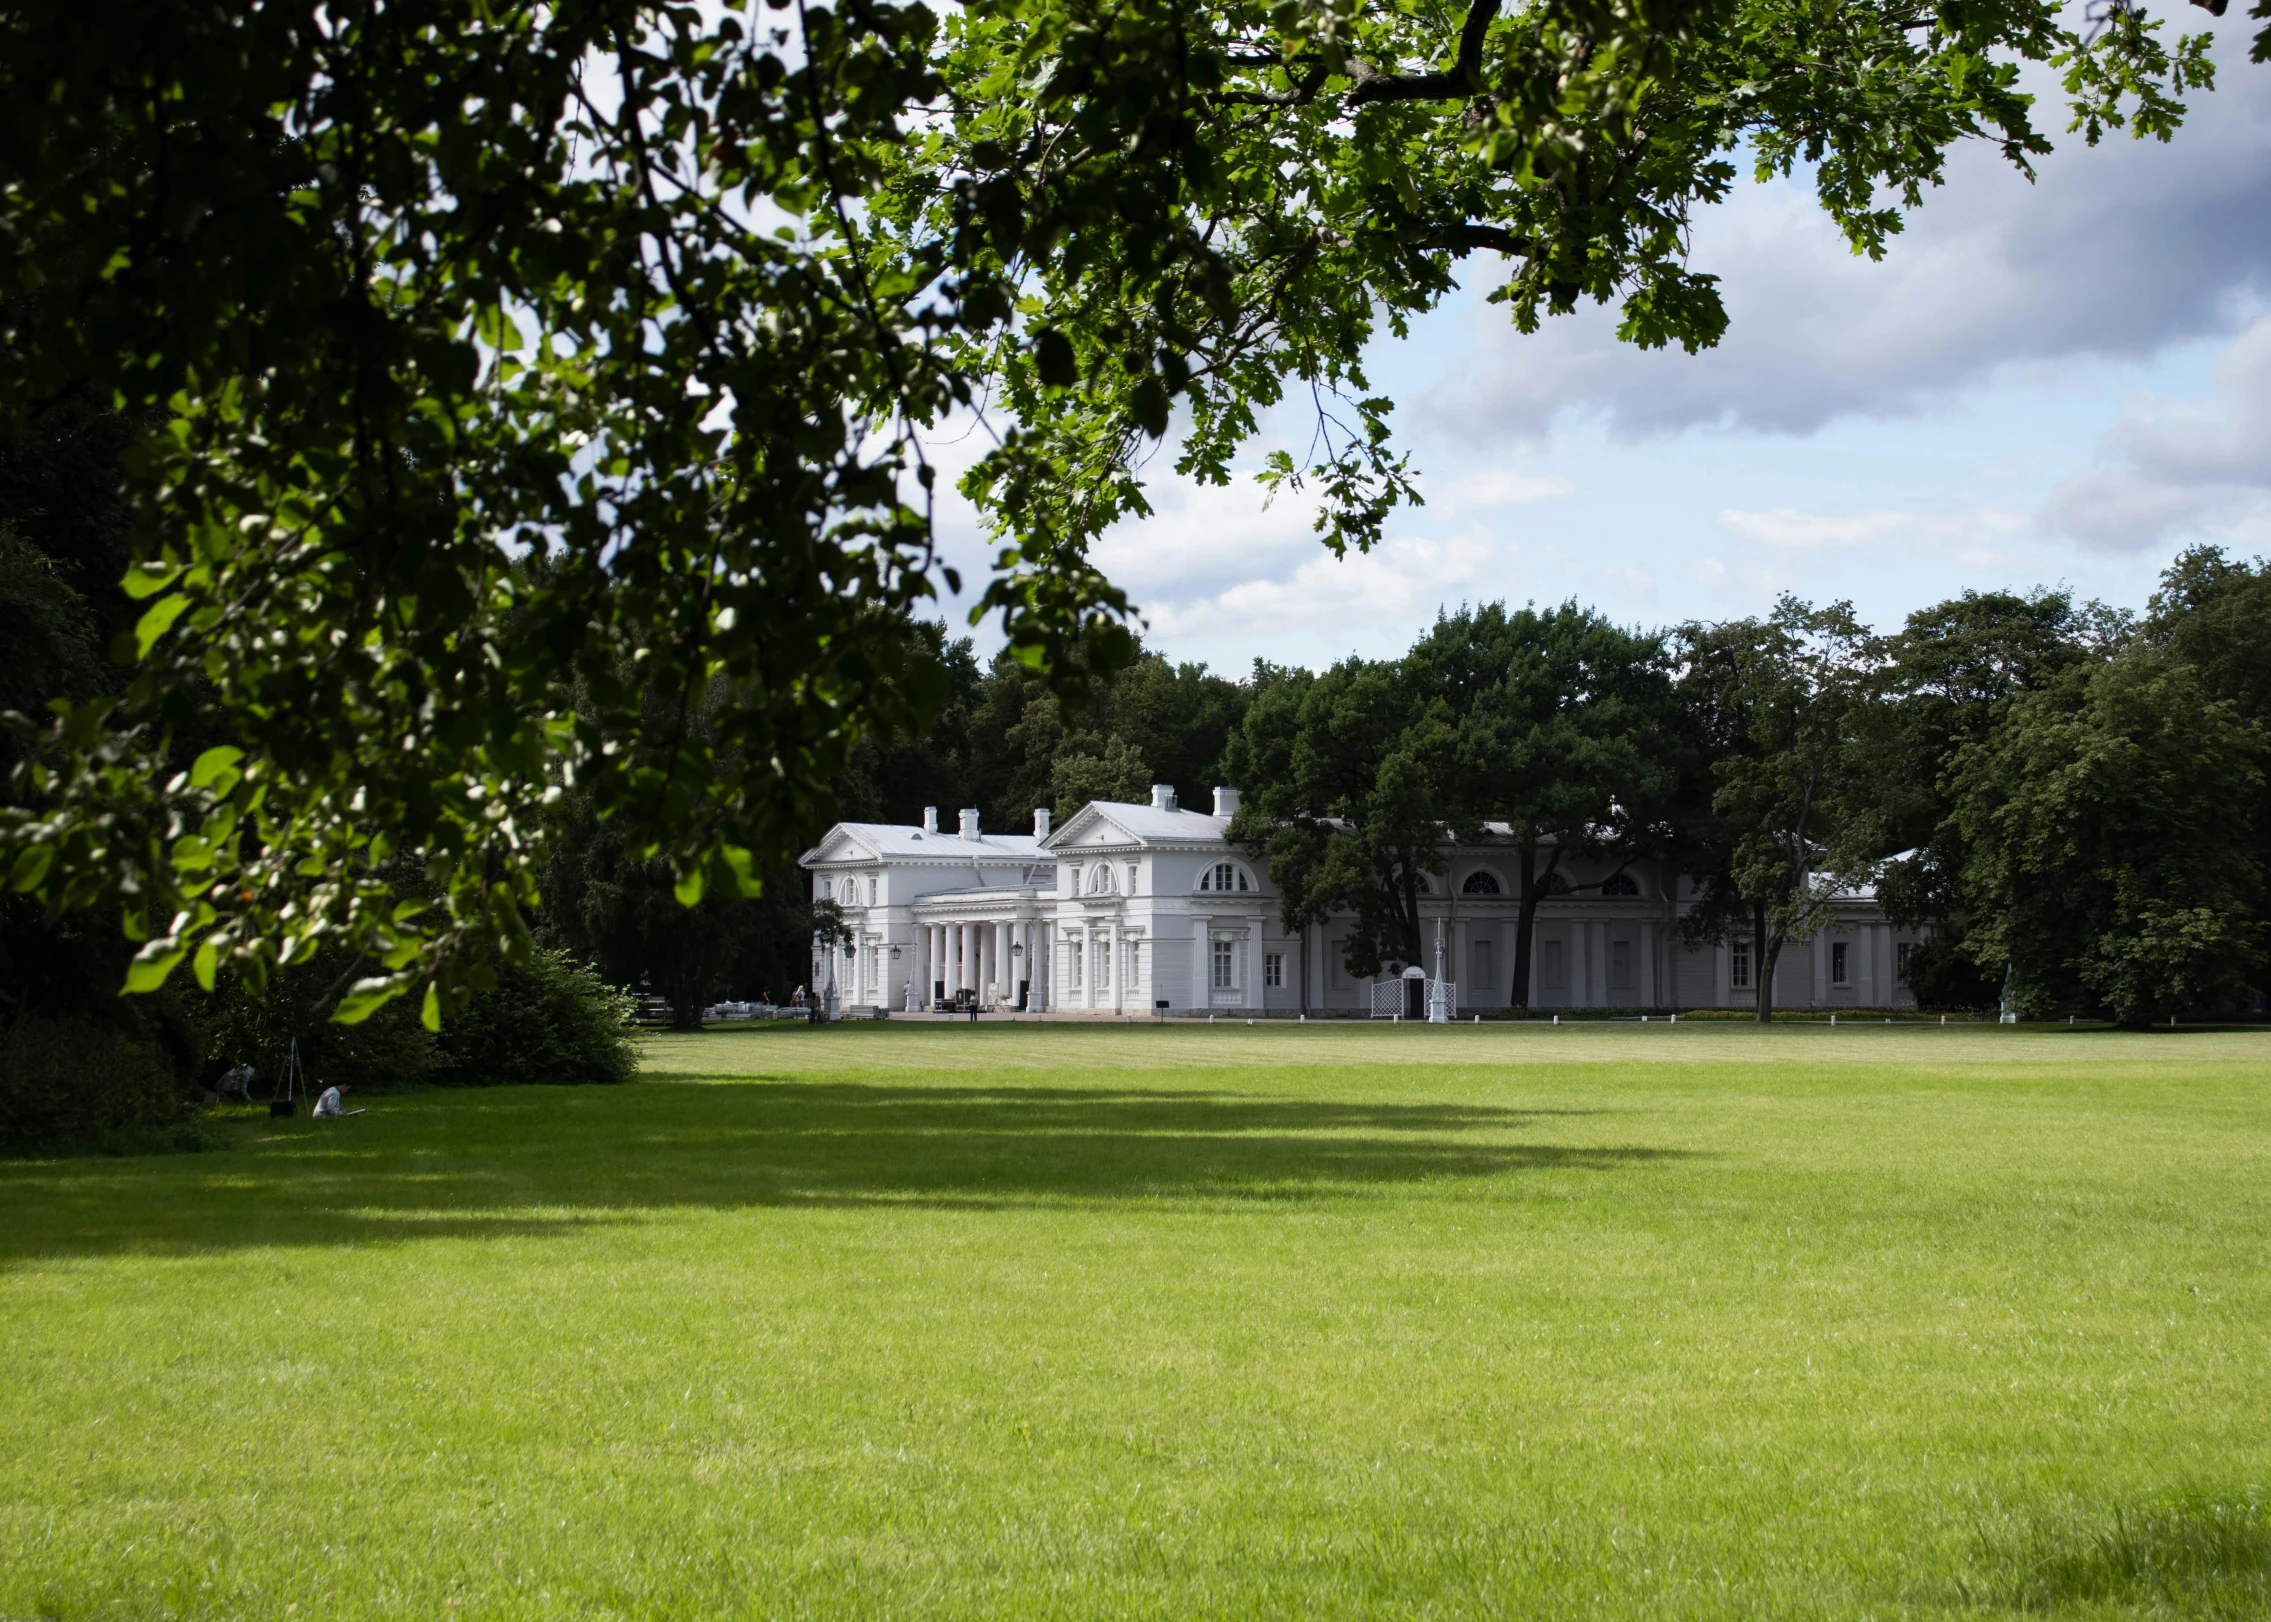 the white house is surrounded by trees and a field